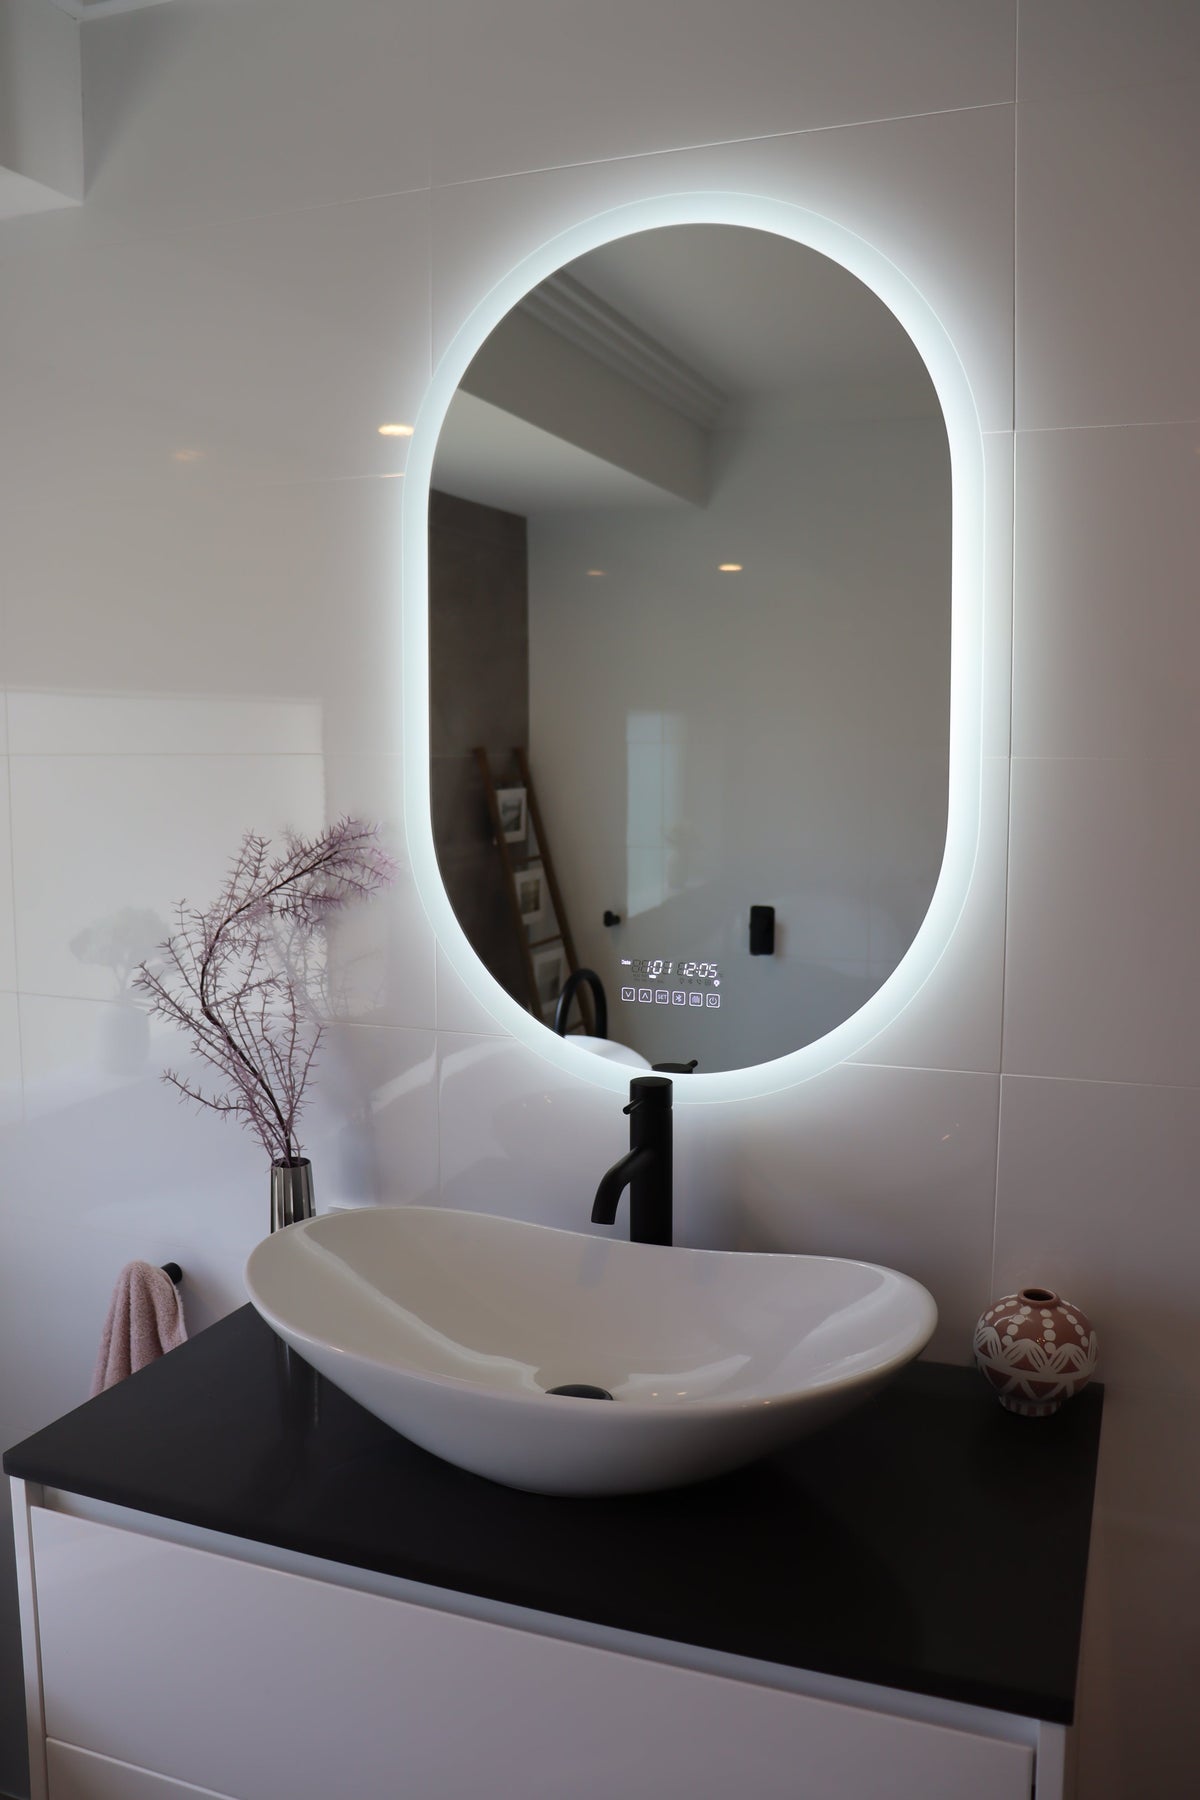  Oval Smart LED mirror illuminates the bathroom in the absence of main lights